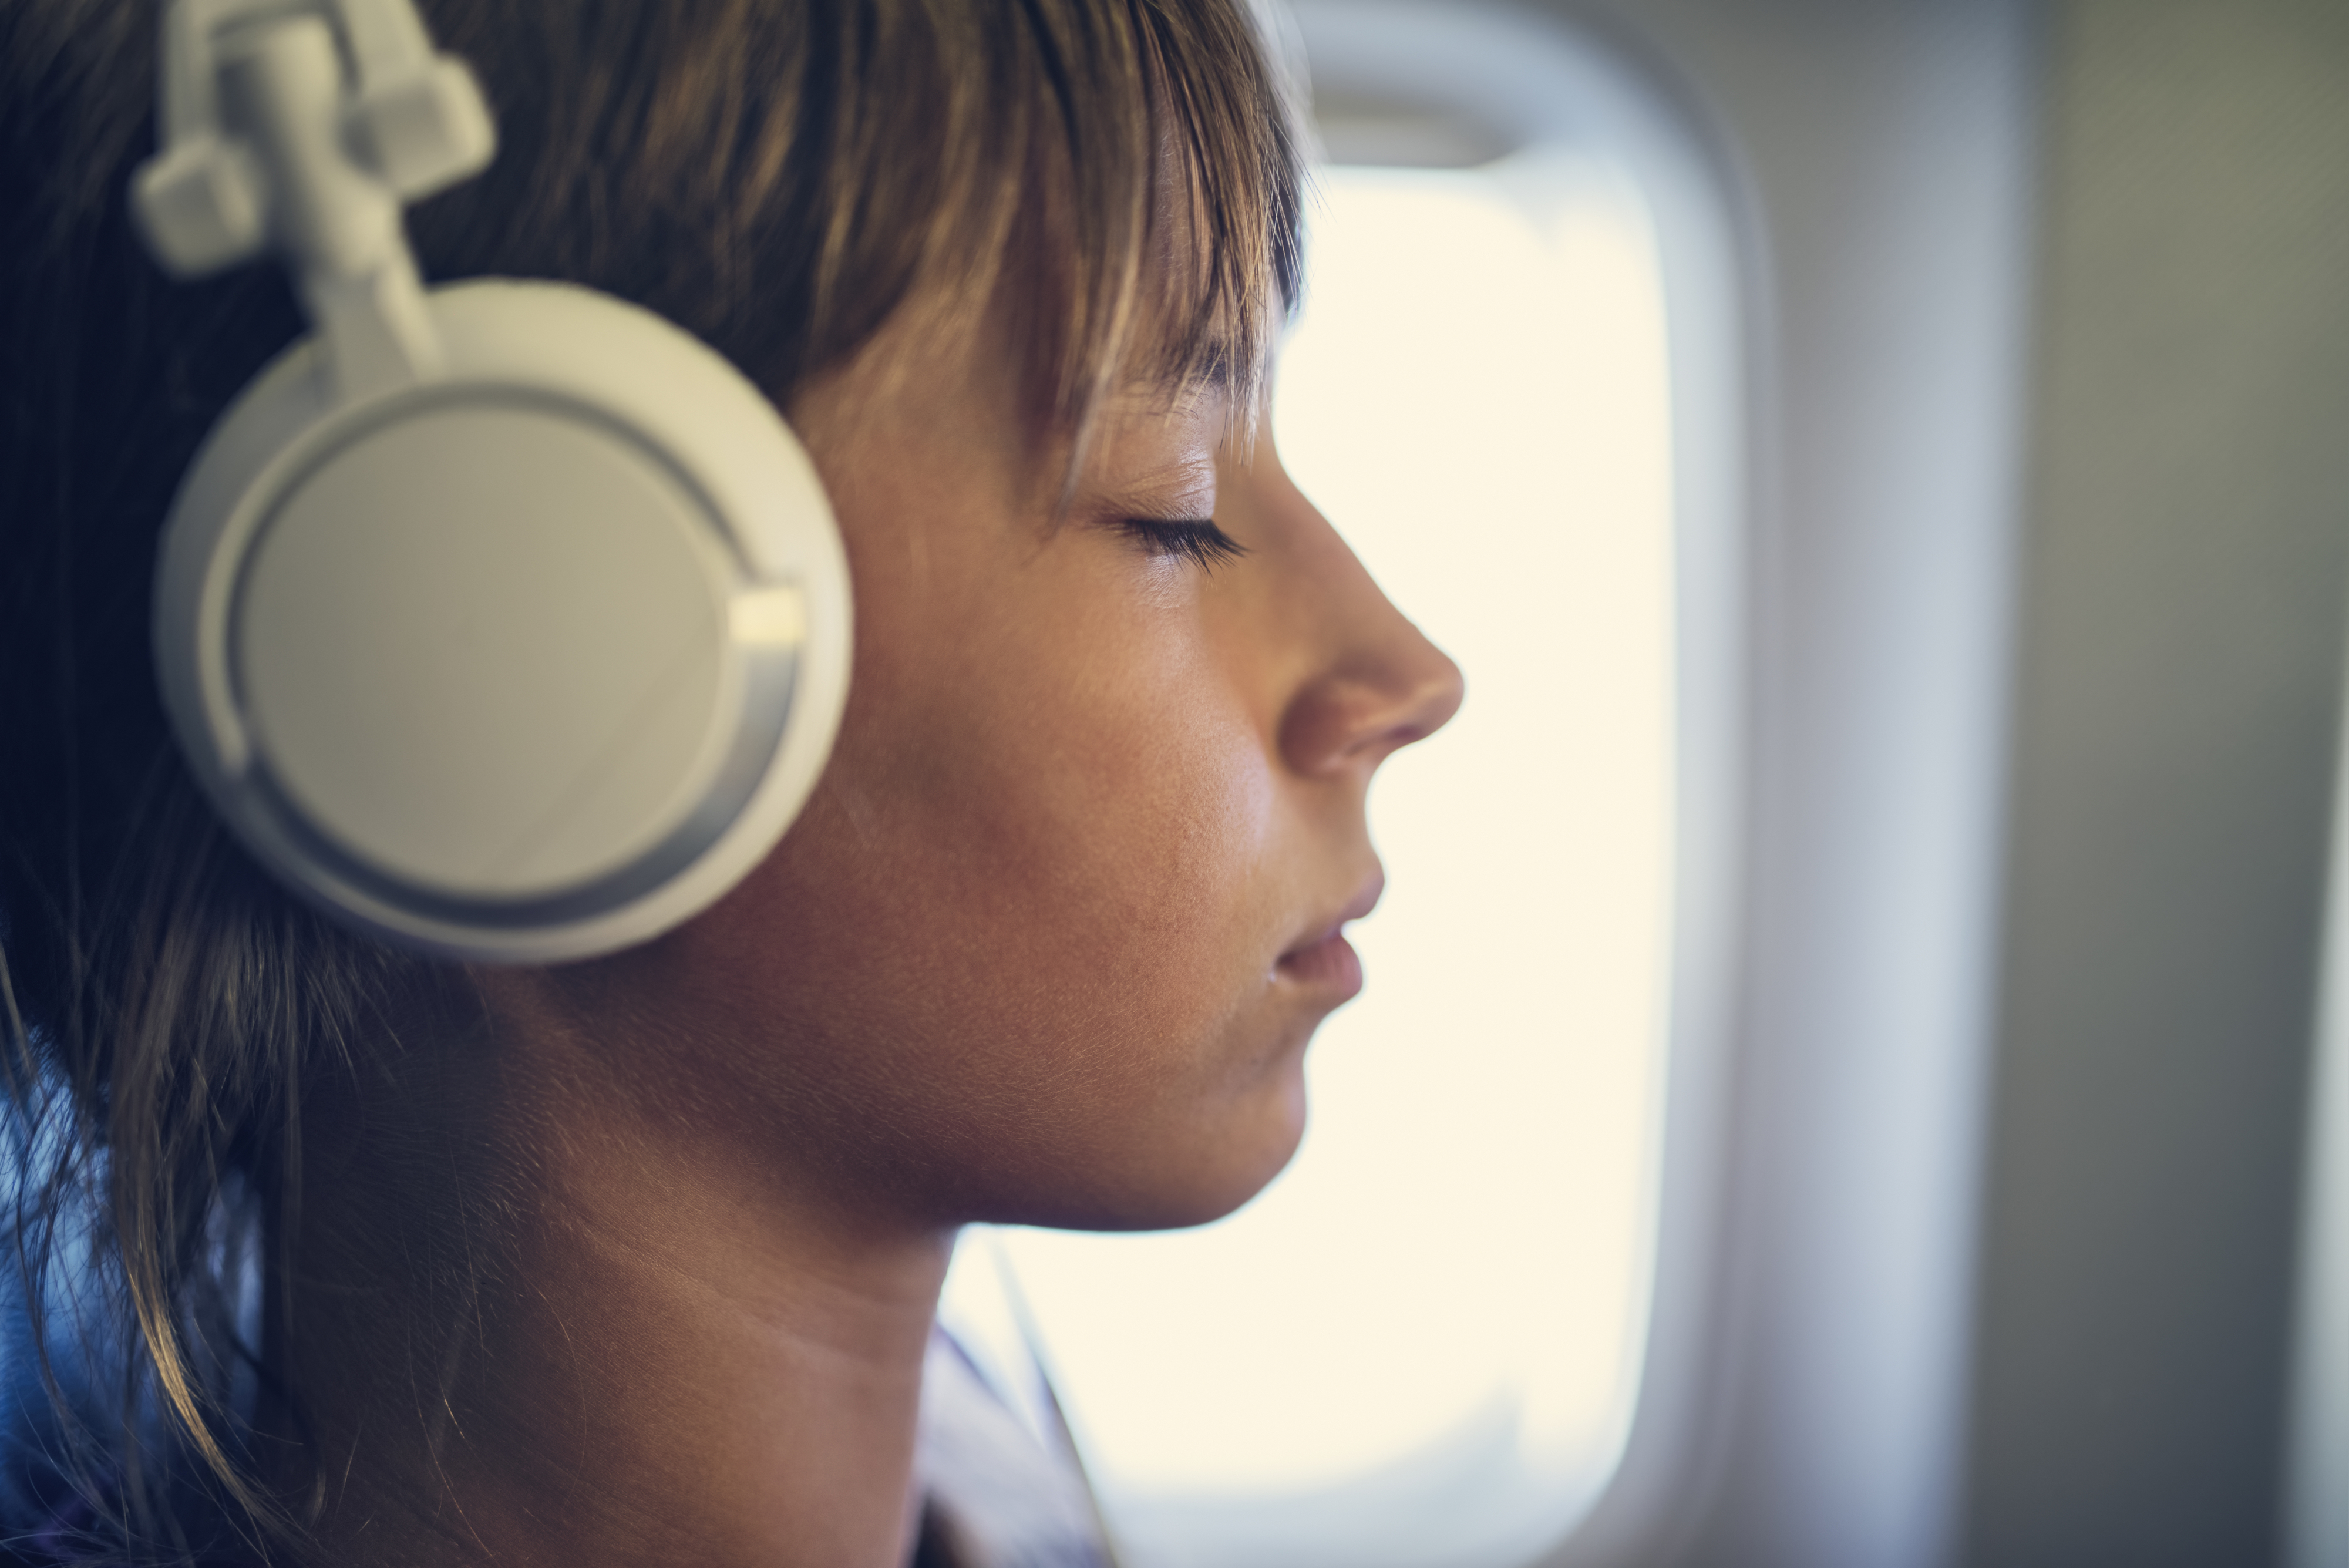 someone wearing headphones with their eyes closed on a plane